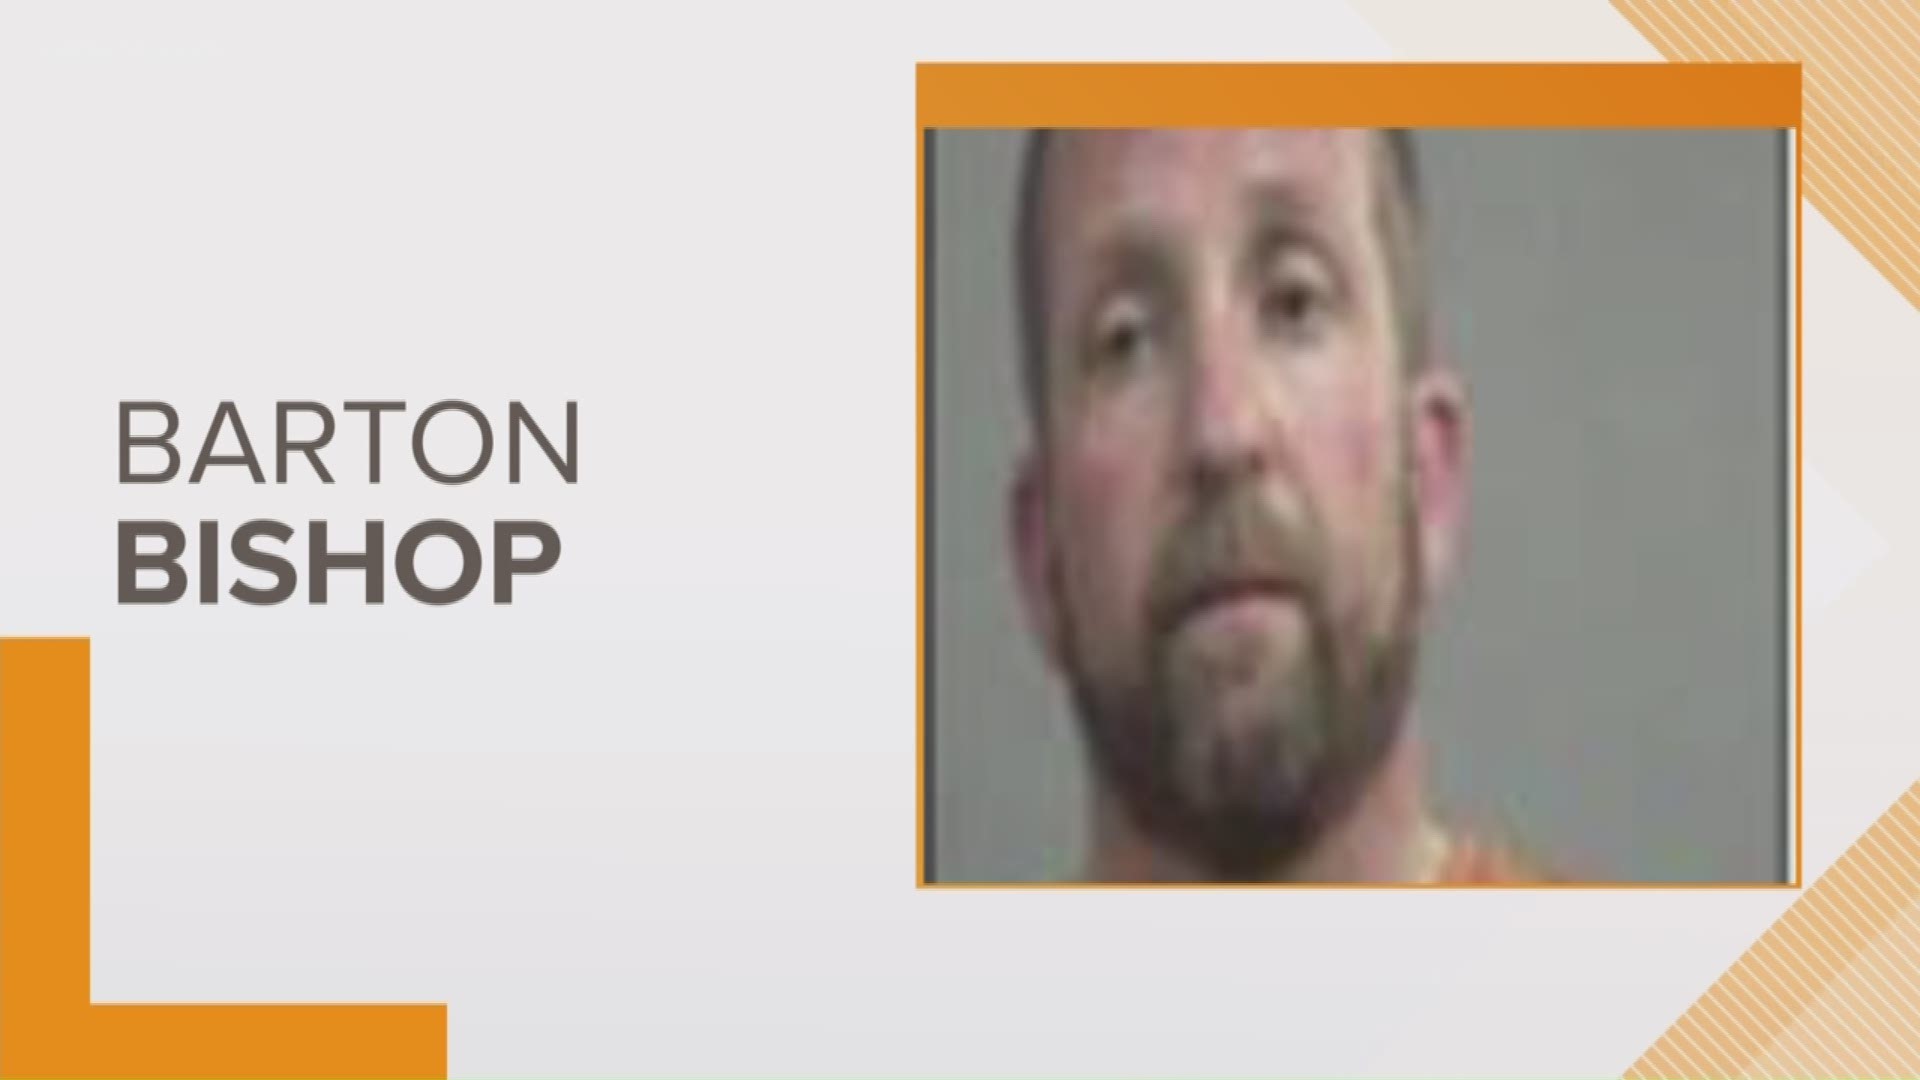 Police say Barton Bishop hasn't shown up for court on his 67 charges of stolen property.